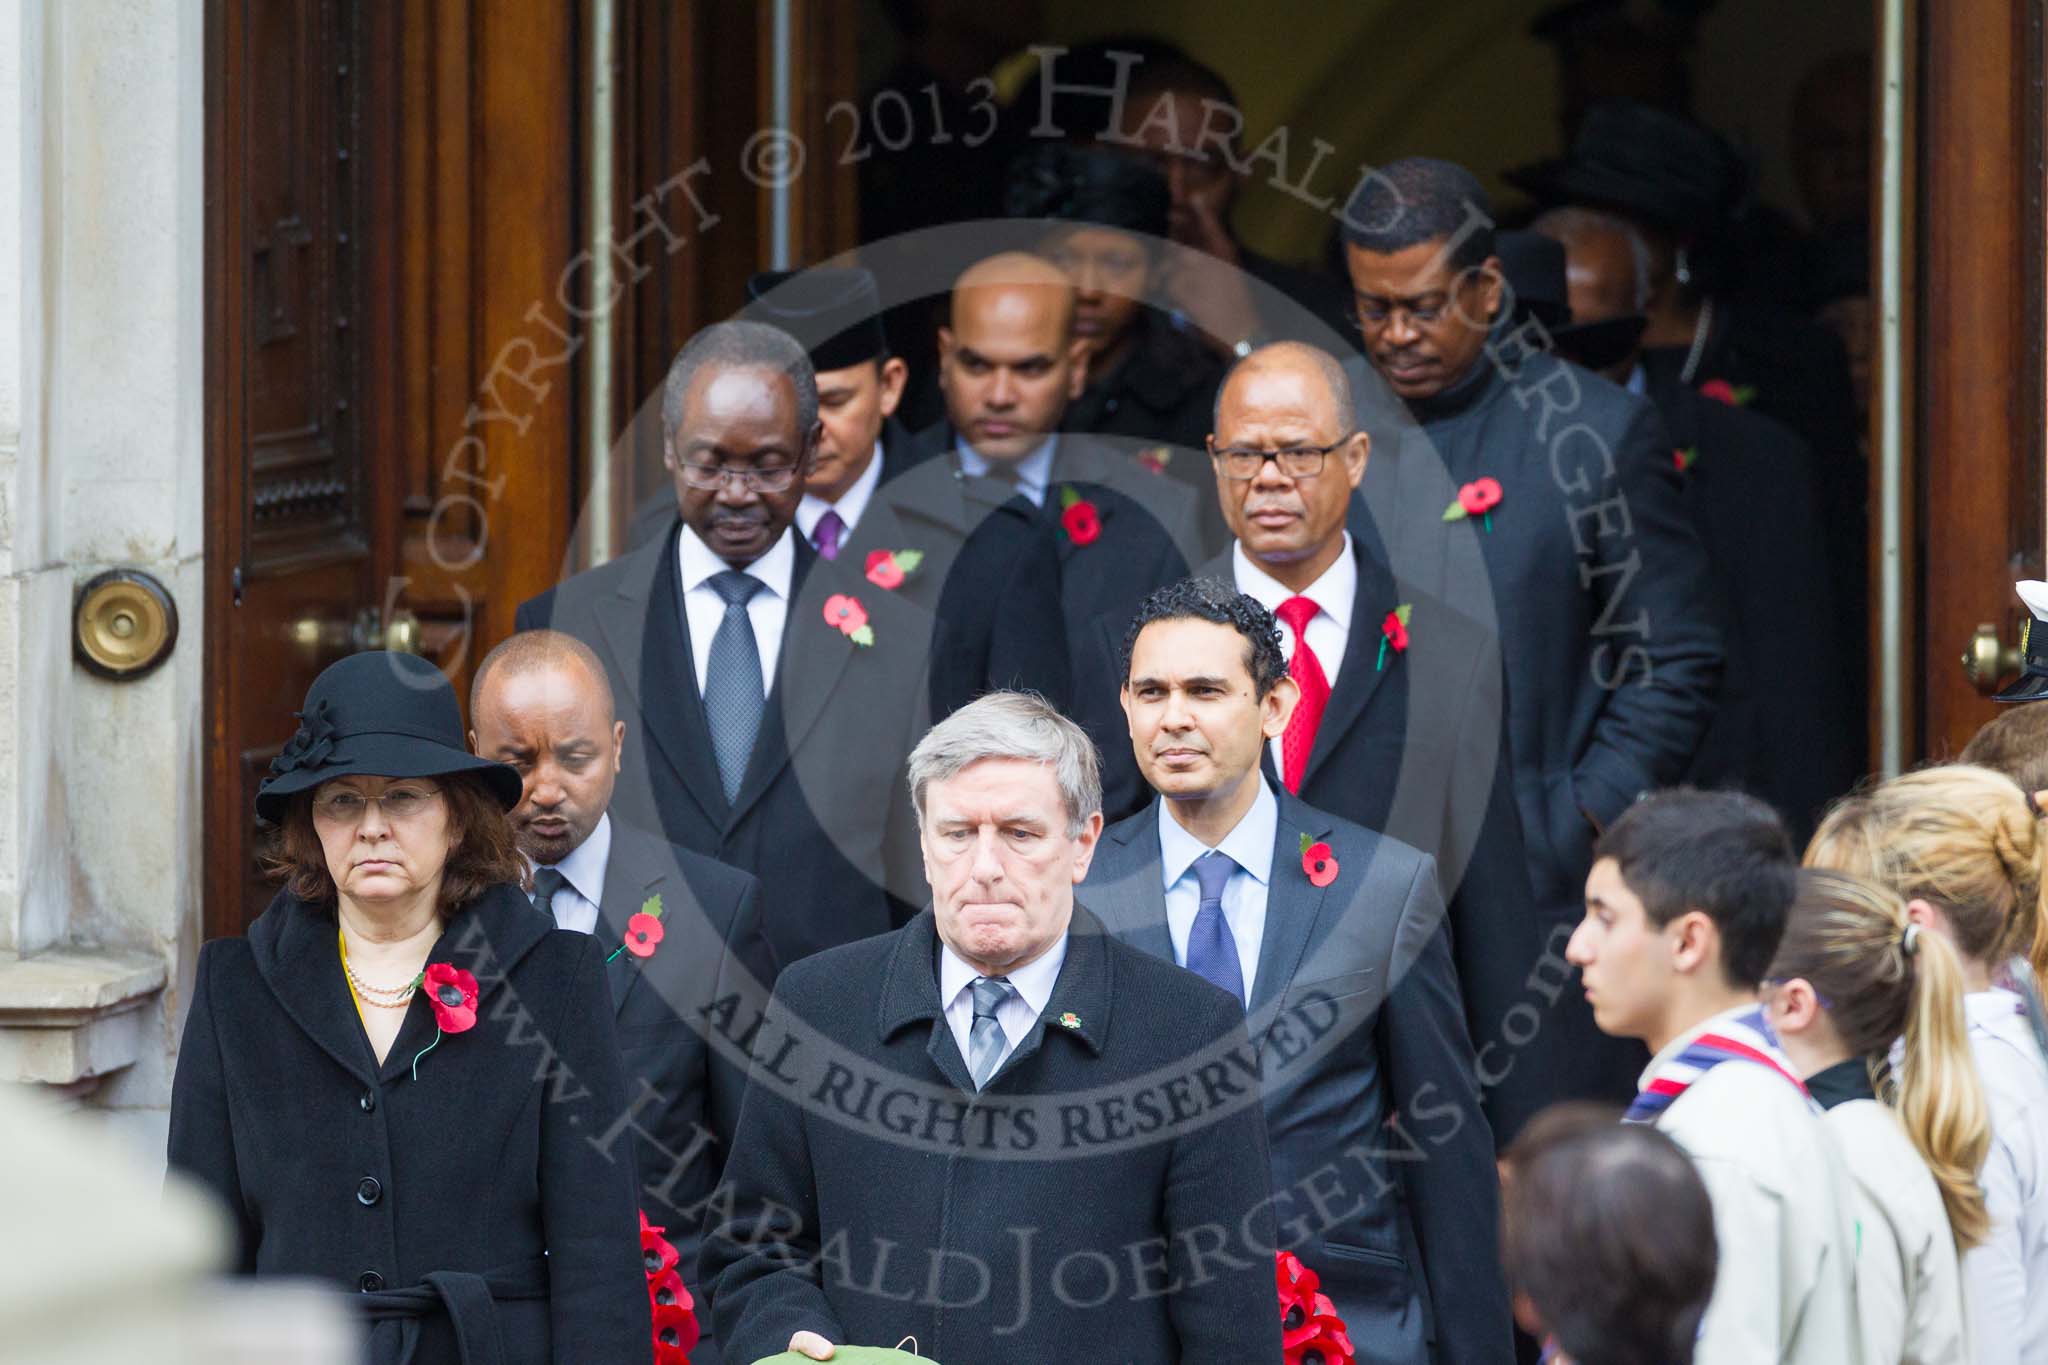 Remembrance Sunday at the Cenotaph 2015: The High Commissioners or their representatives leaving the Foreign- and Commonwealth Office. Image #94, 08 November 2015 10:55 Whitehall, London, UK